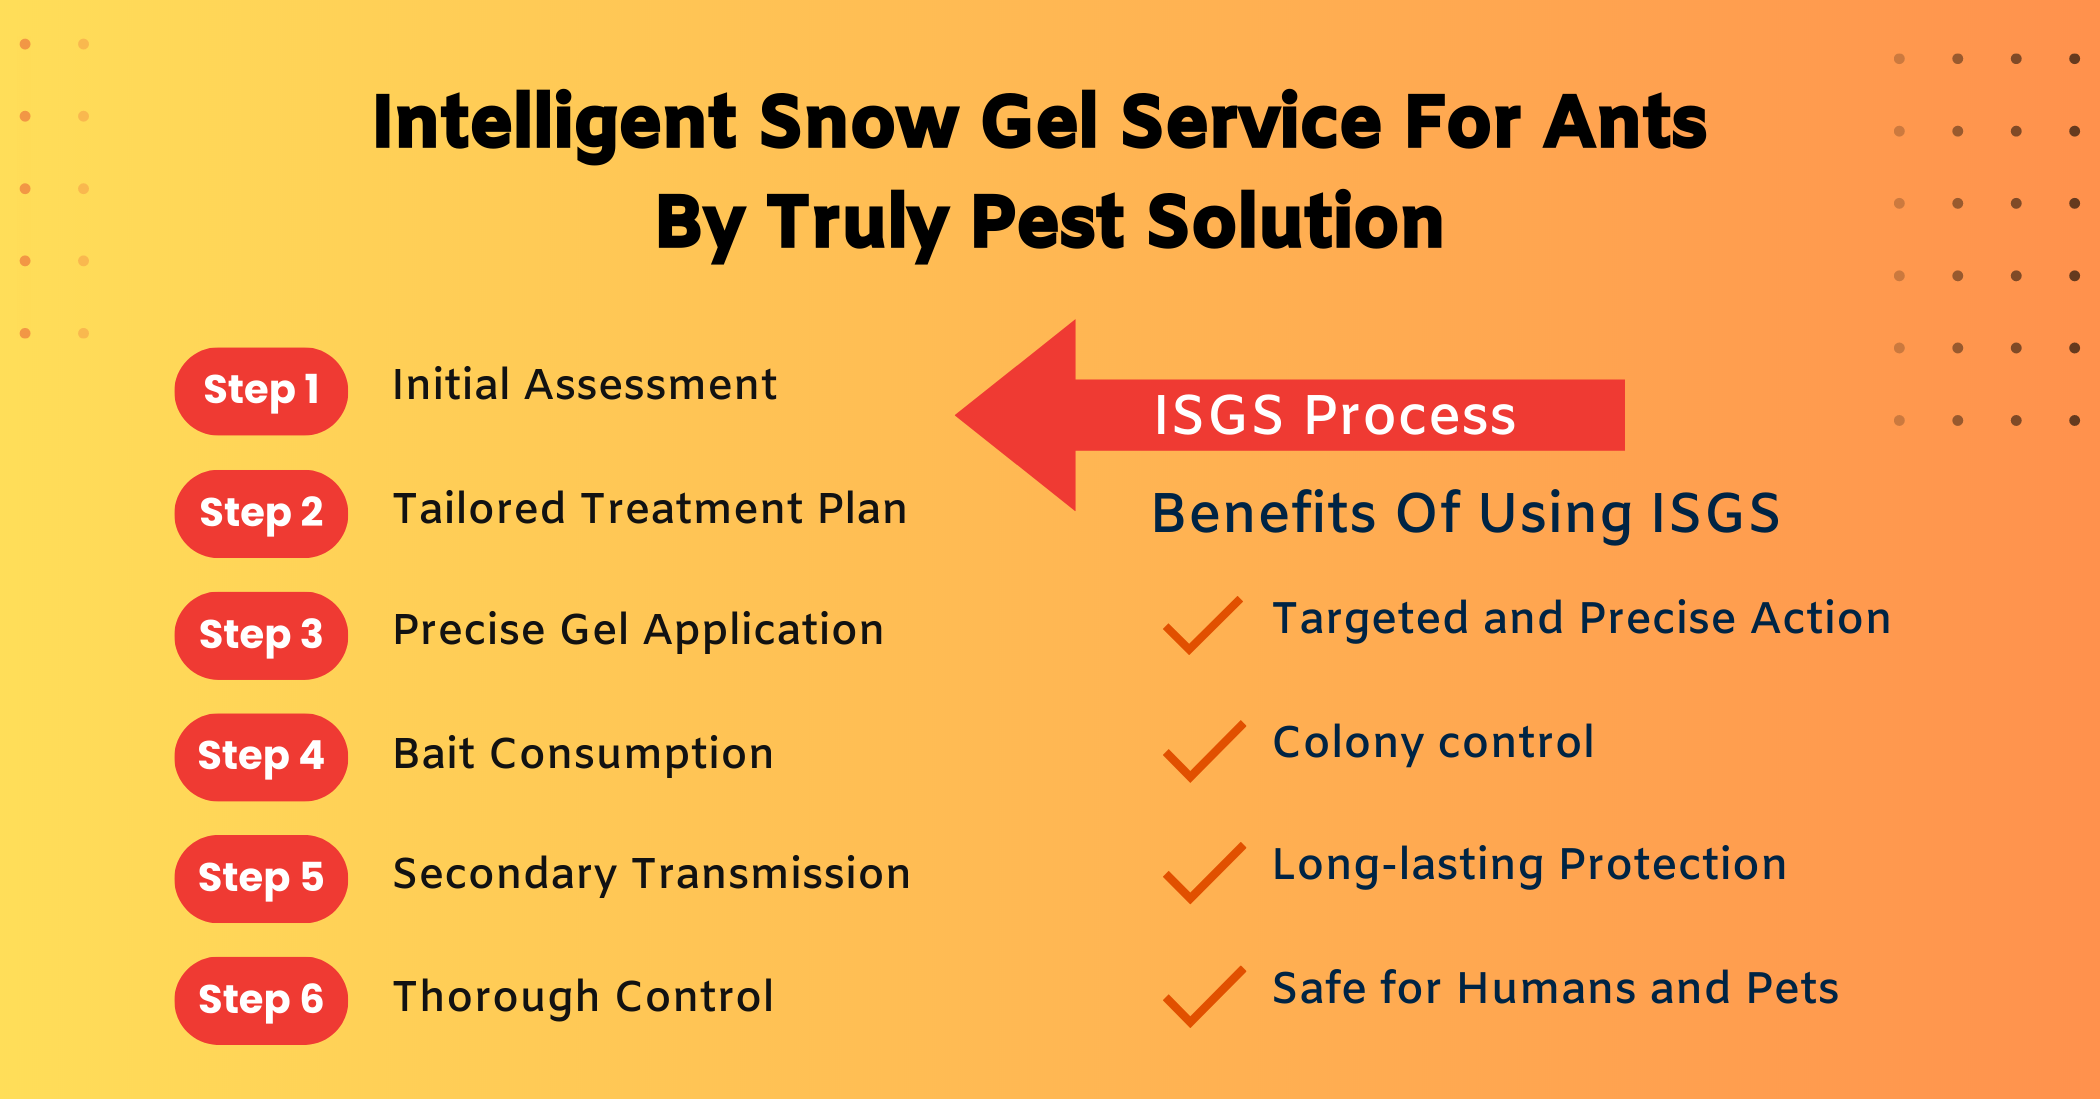 Intelligent-Snow-Gel-Service-For-Ants-By-Truly-Pest-Solution